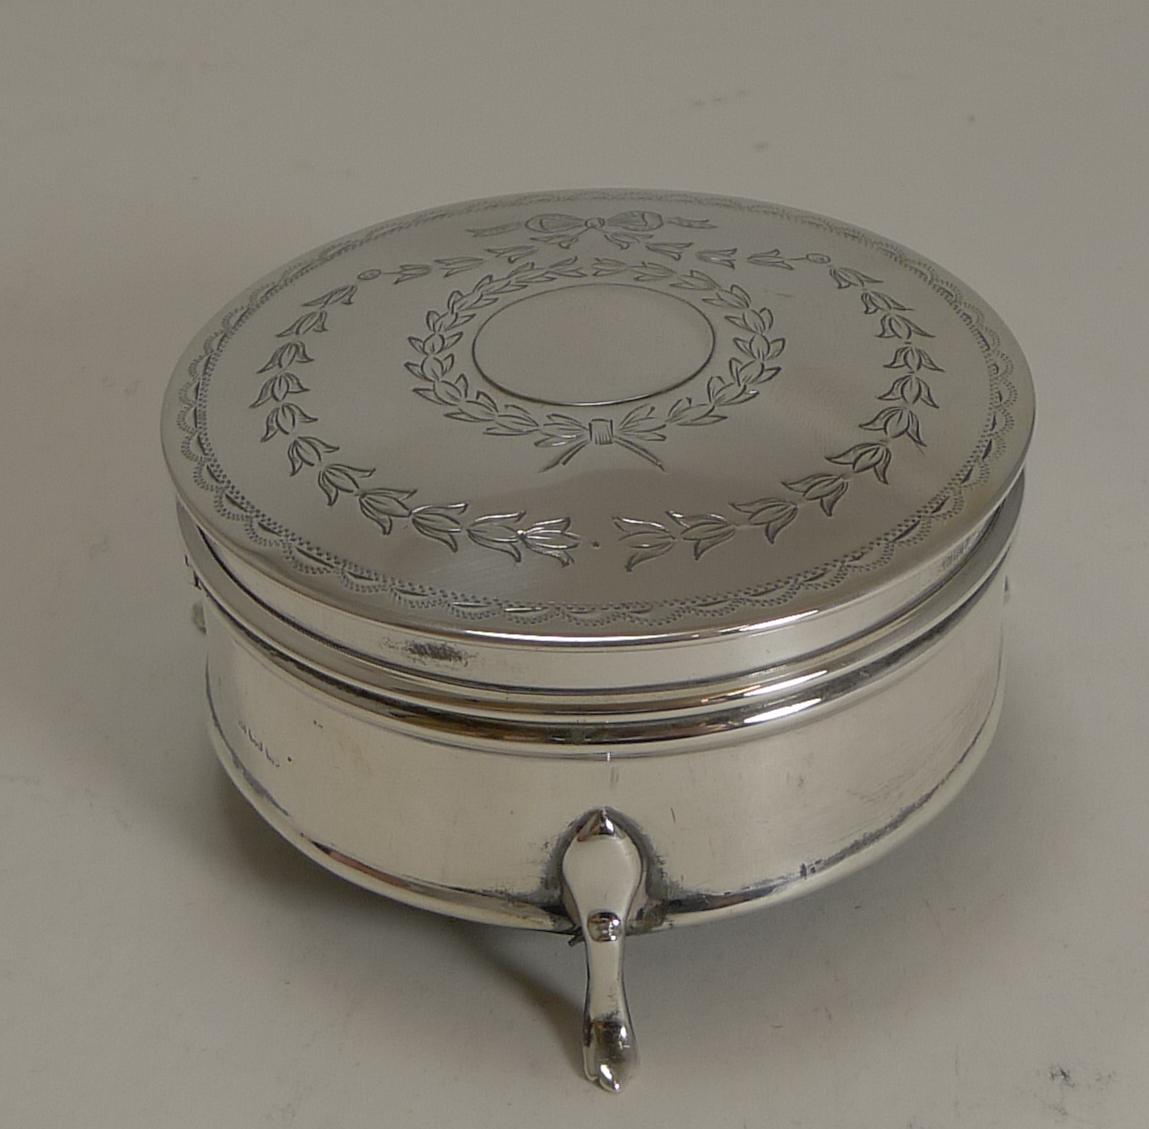 A wonderful pretty circular jewelry box standing on three elegant legs.

The hinged lid is engraved with acanthus leaf garlands tied with ribbon and bows. The lid fits well and once opened reveals an attractive deep pink / red silk.

The silver